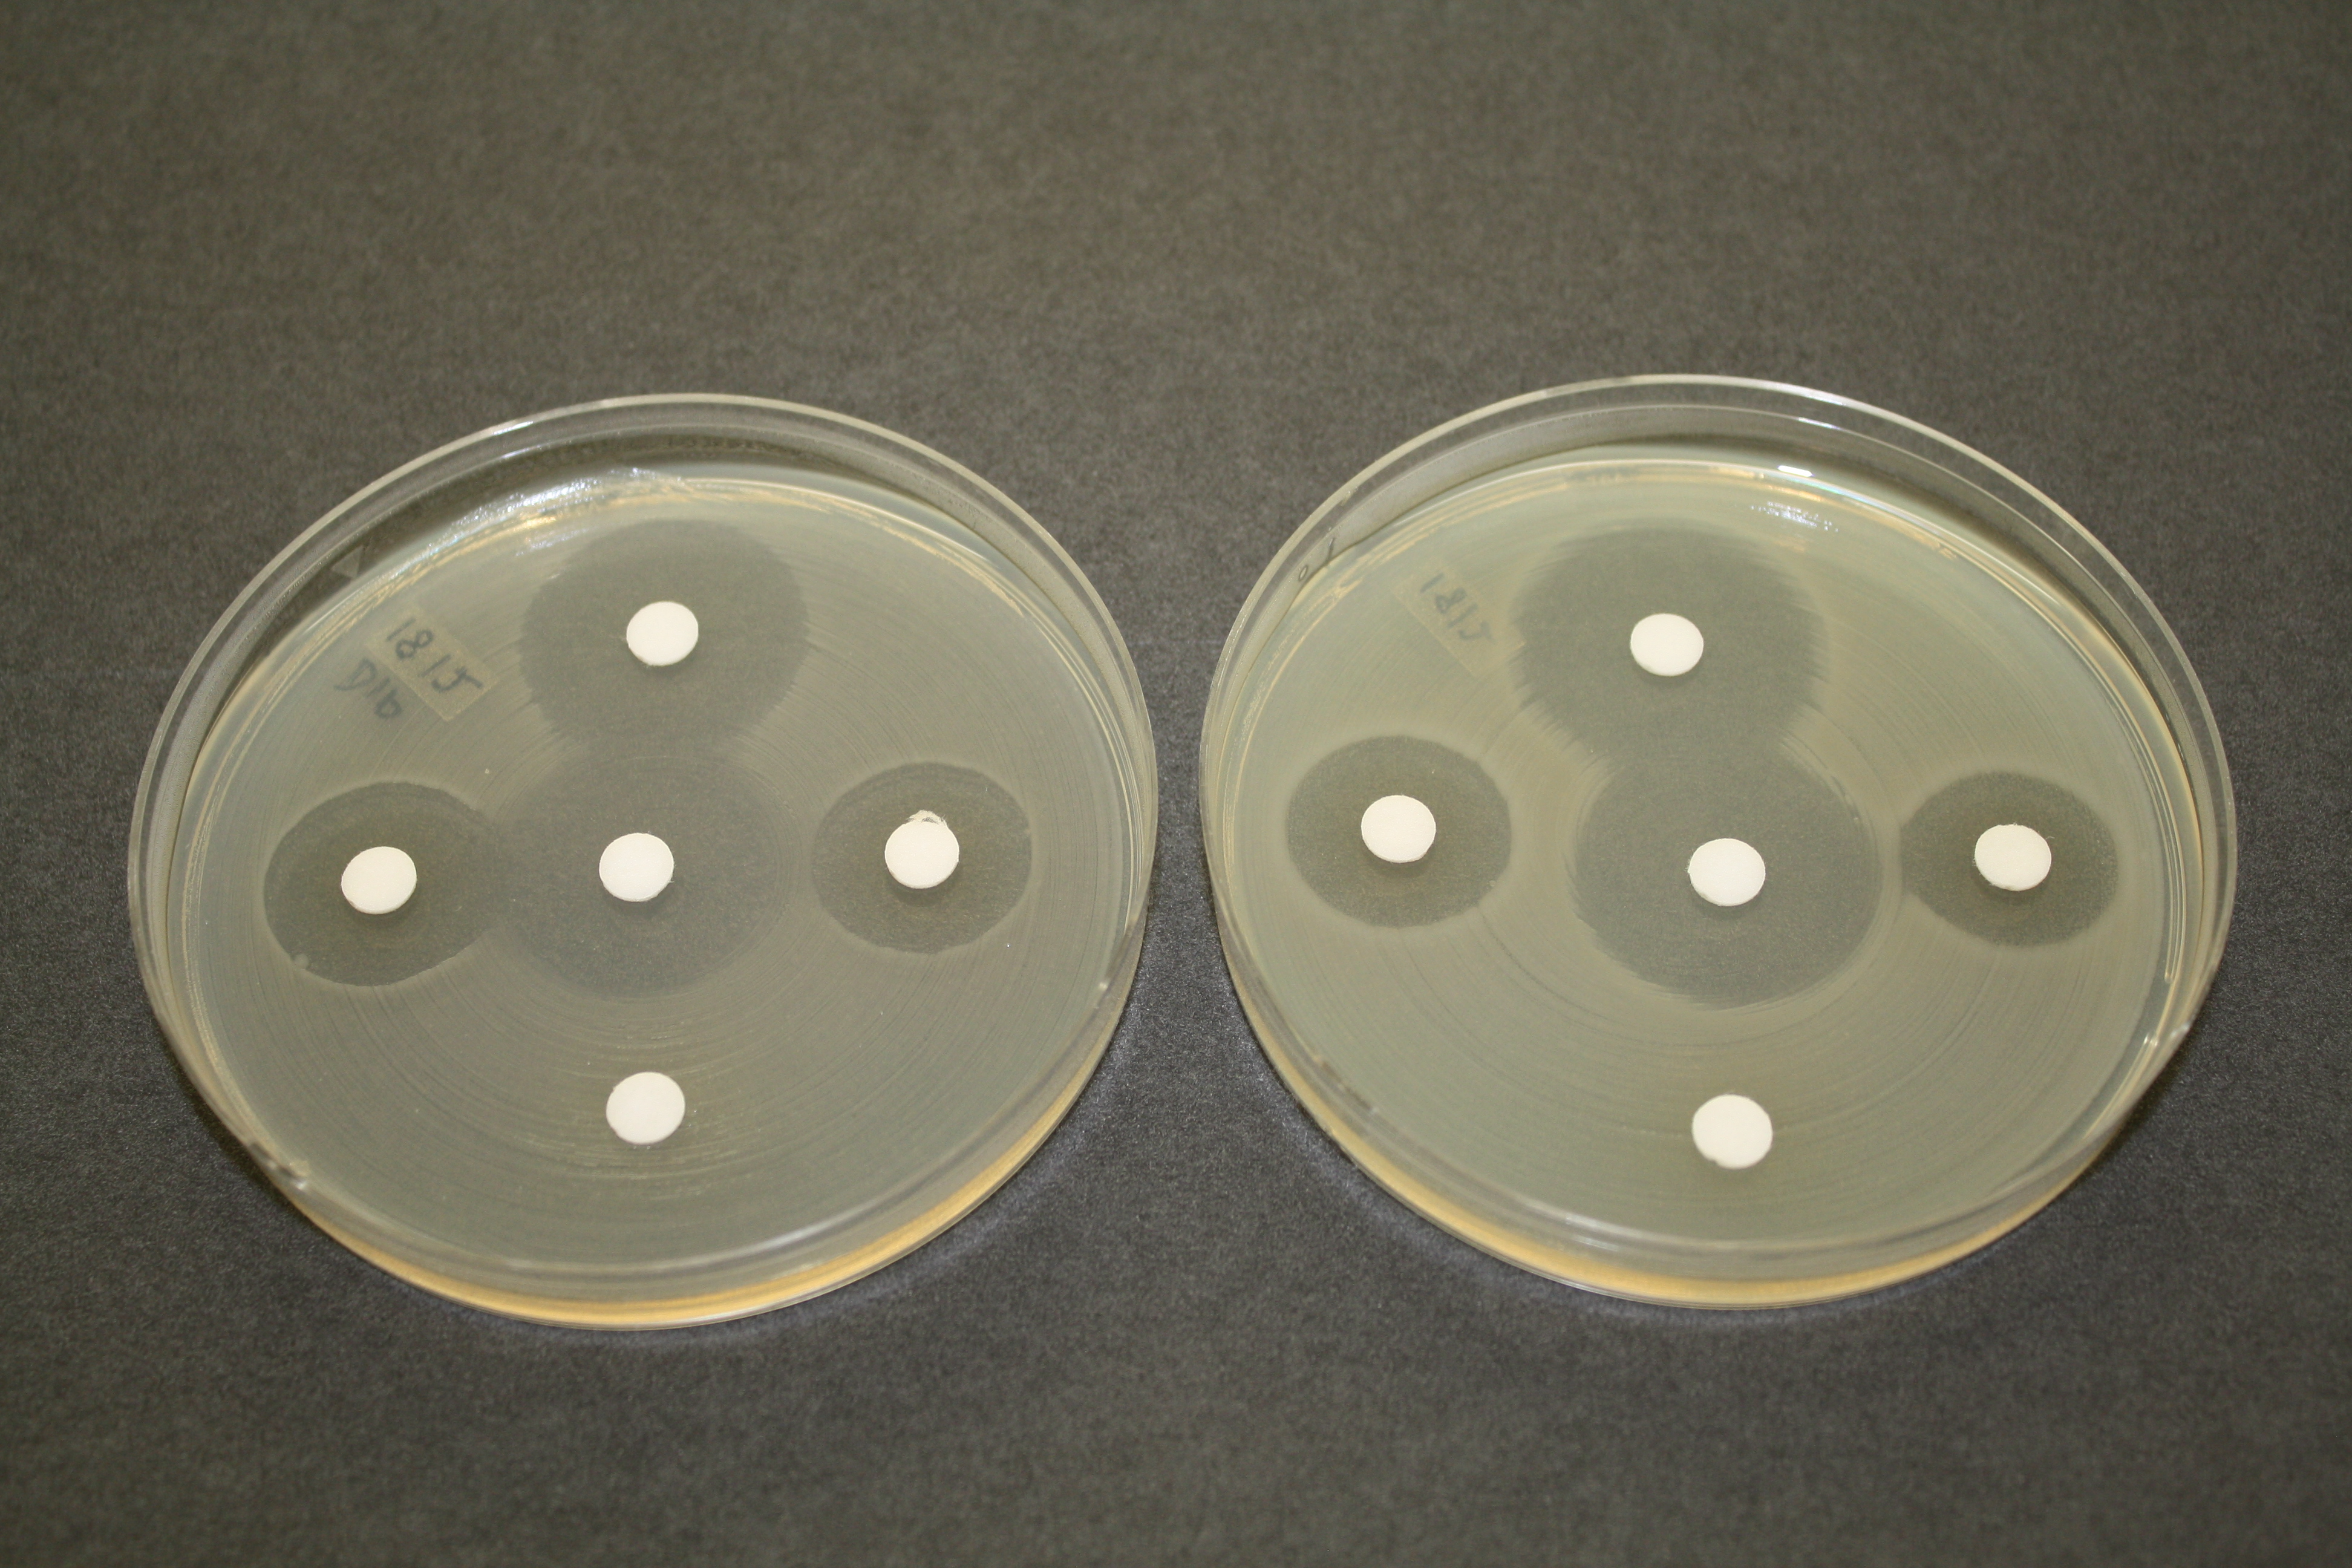 Two petrie dishes with white dots on agar.